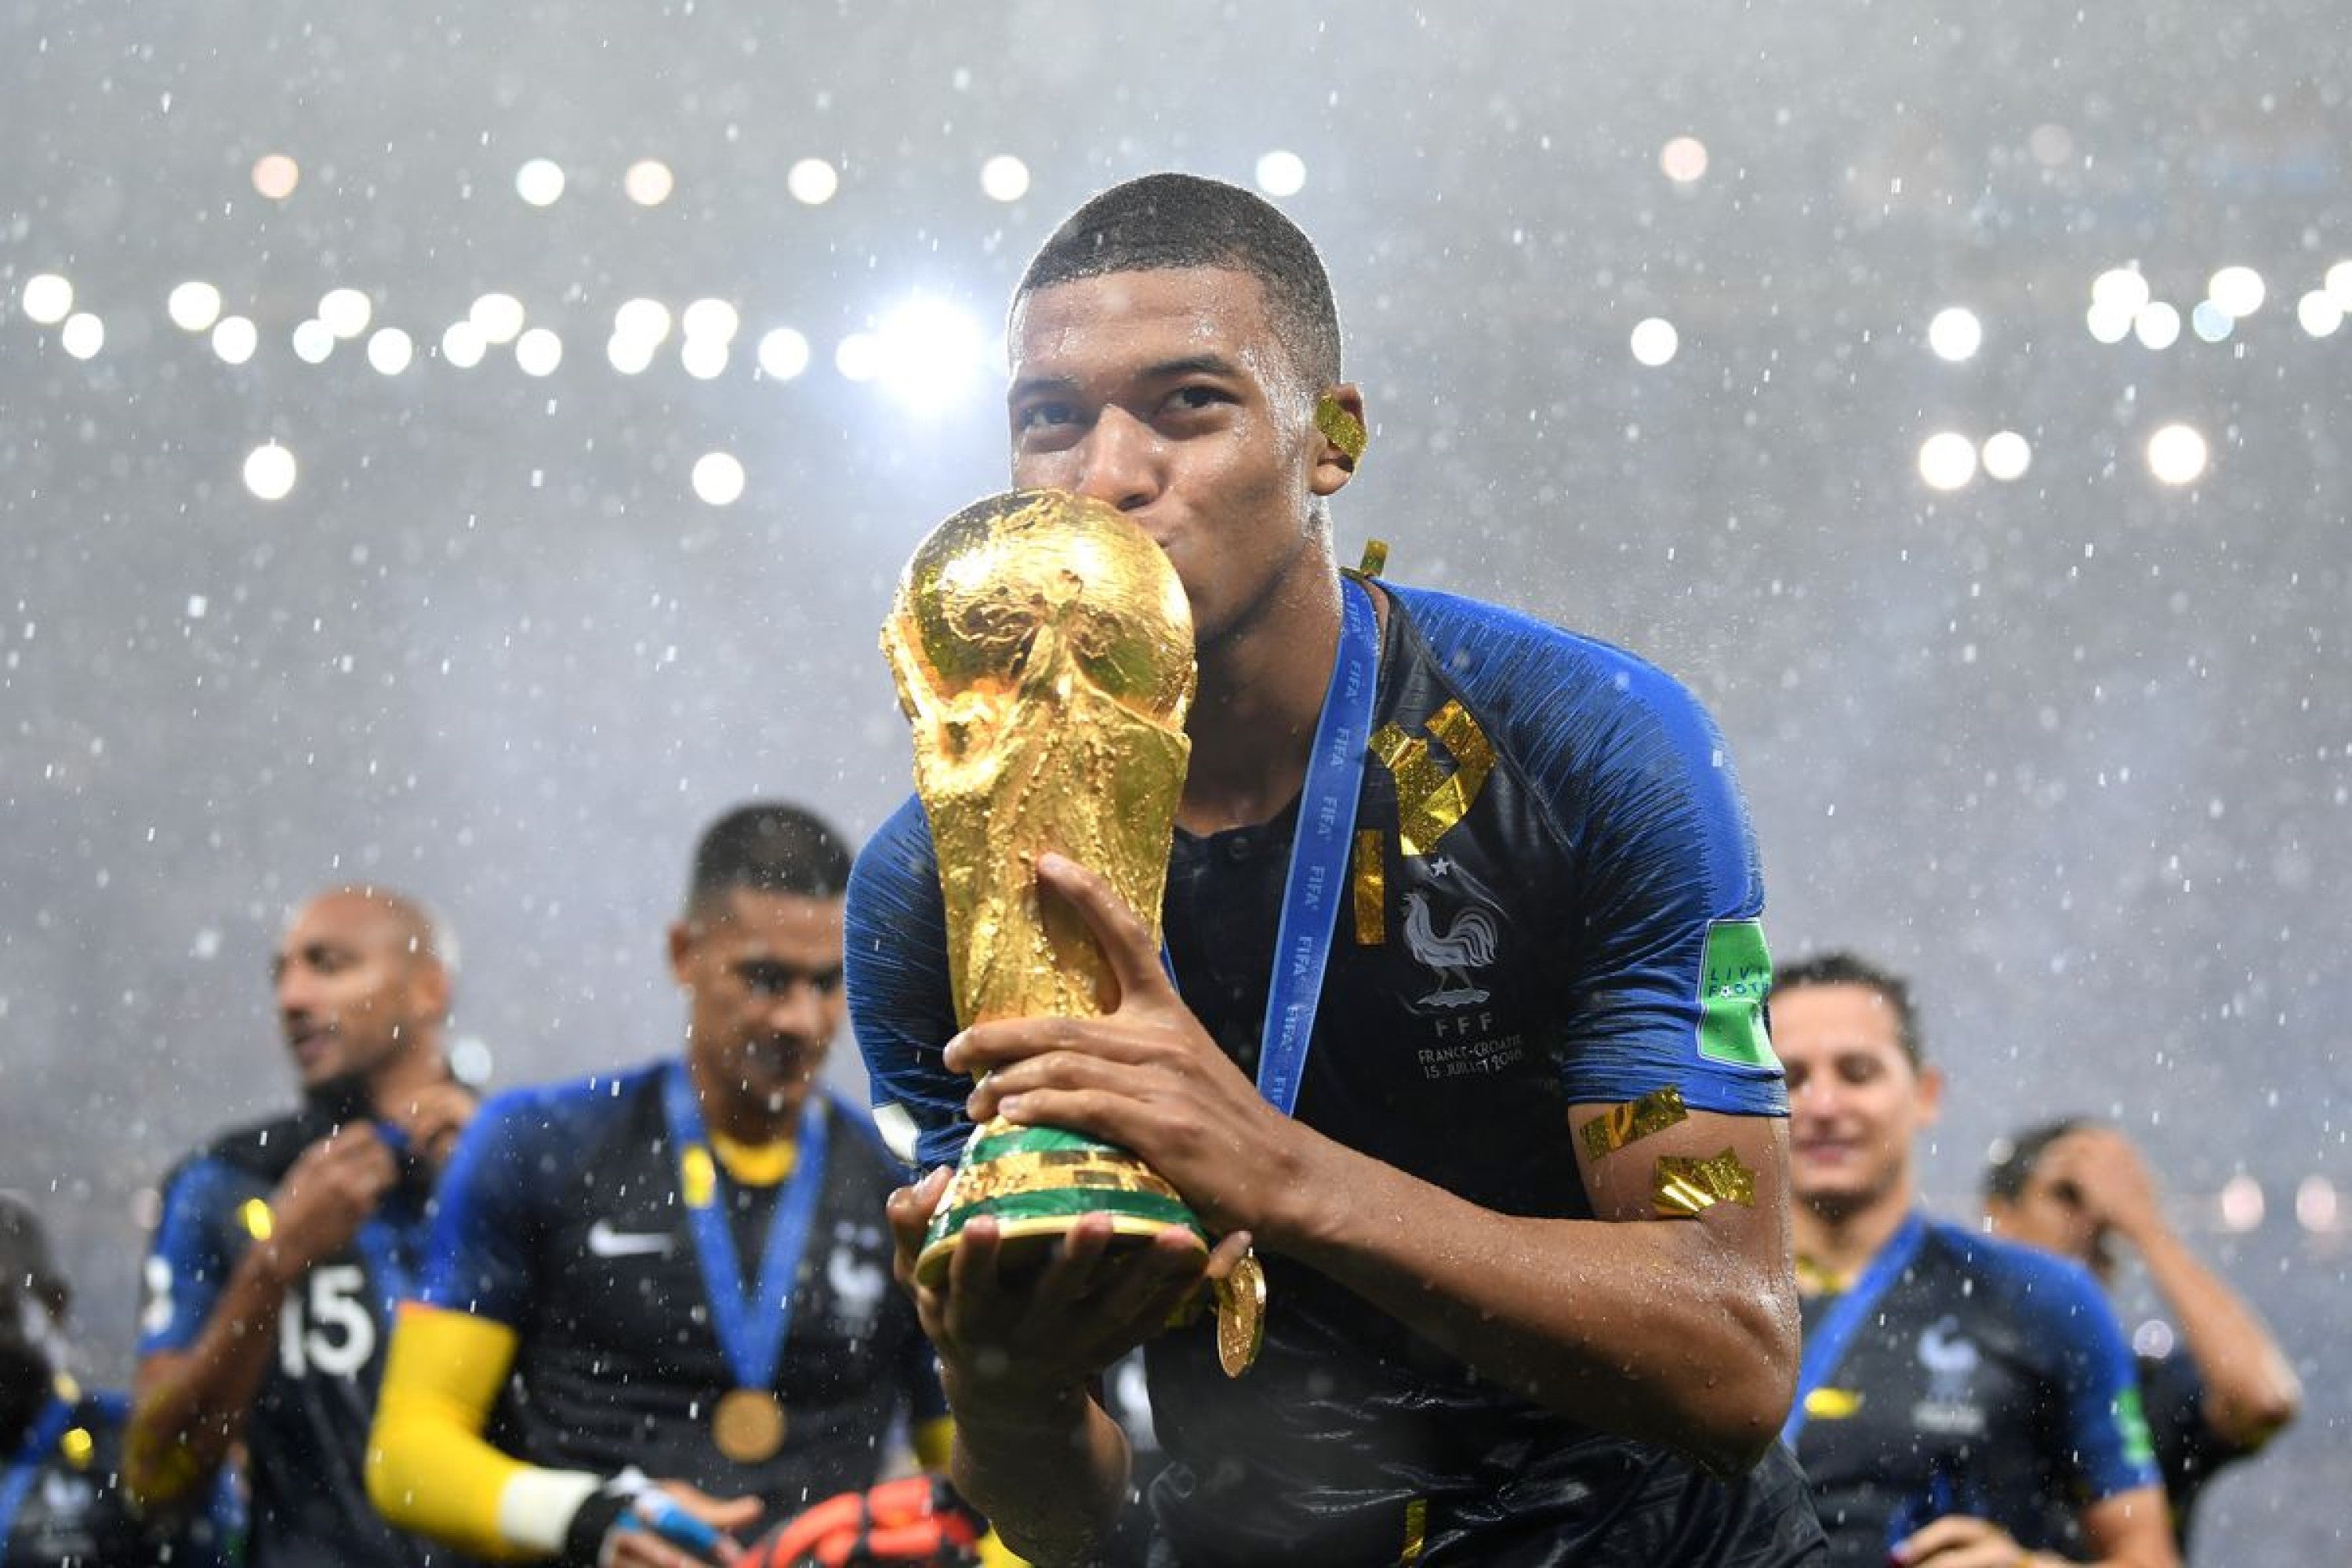 2018 Champions France and their talisman, Kylian Mbappe